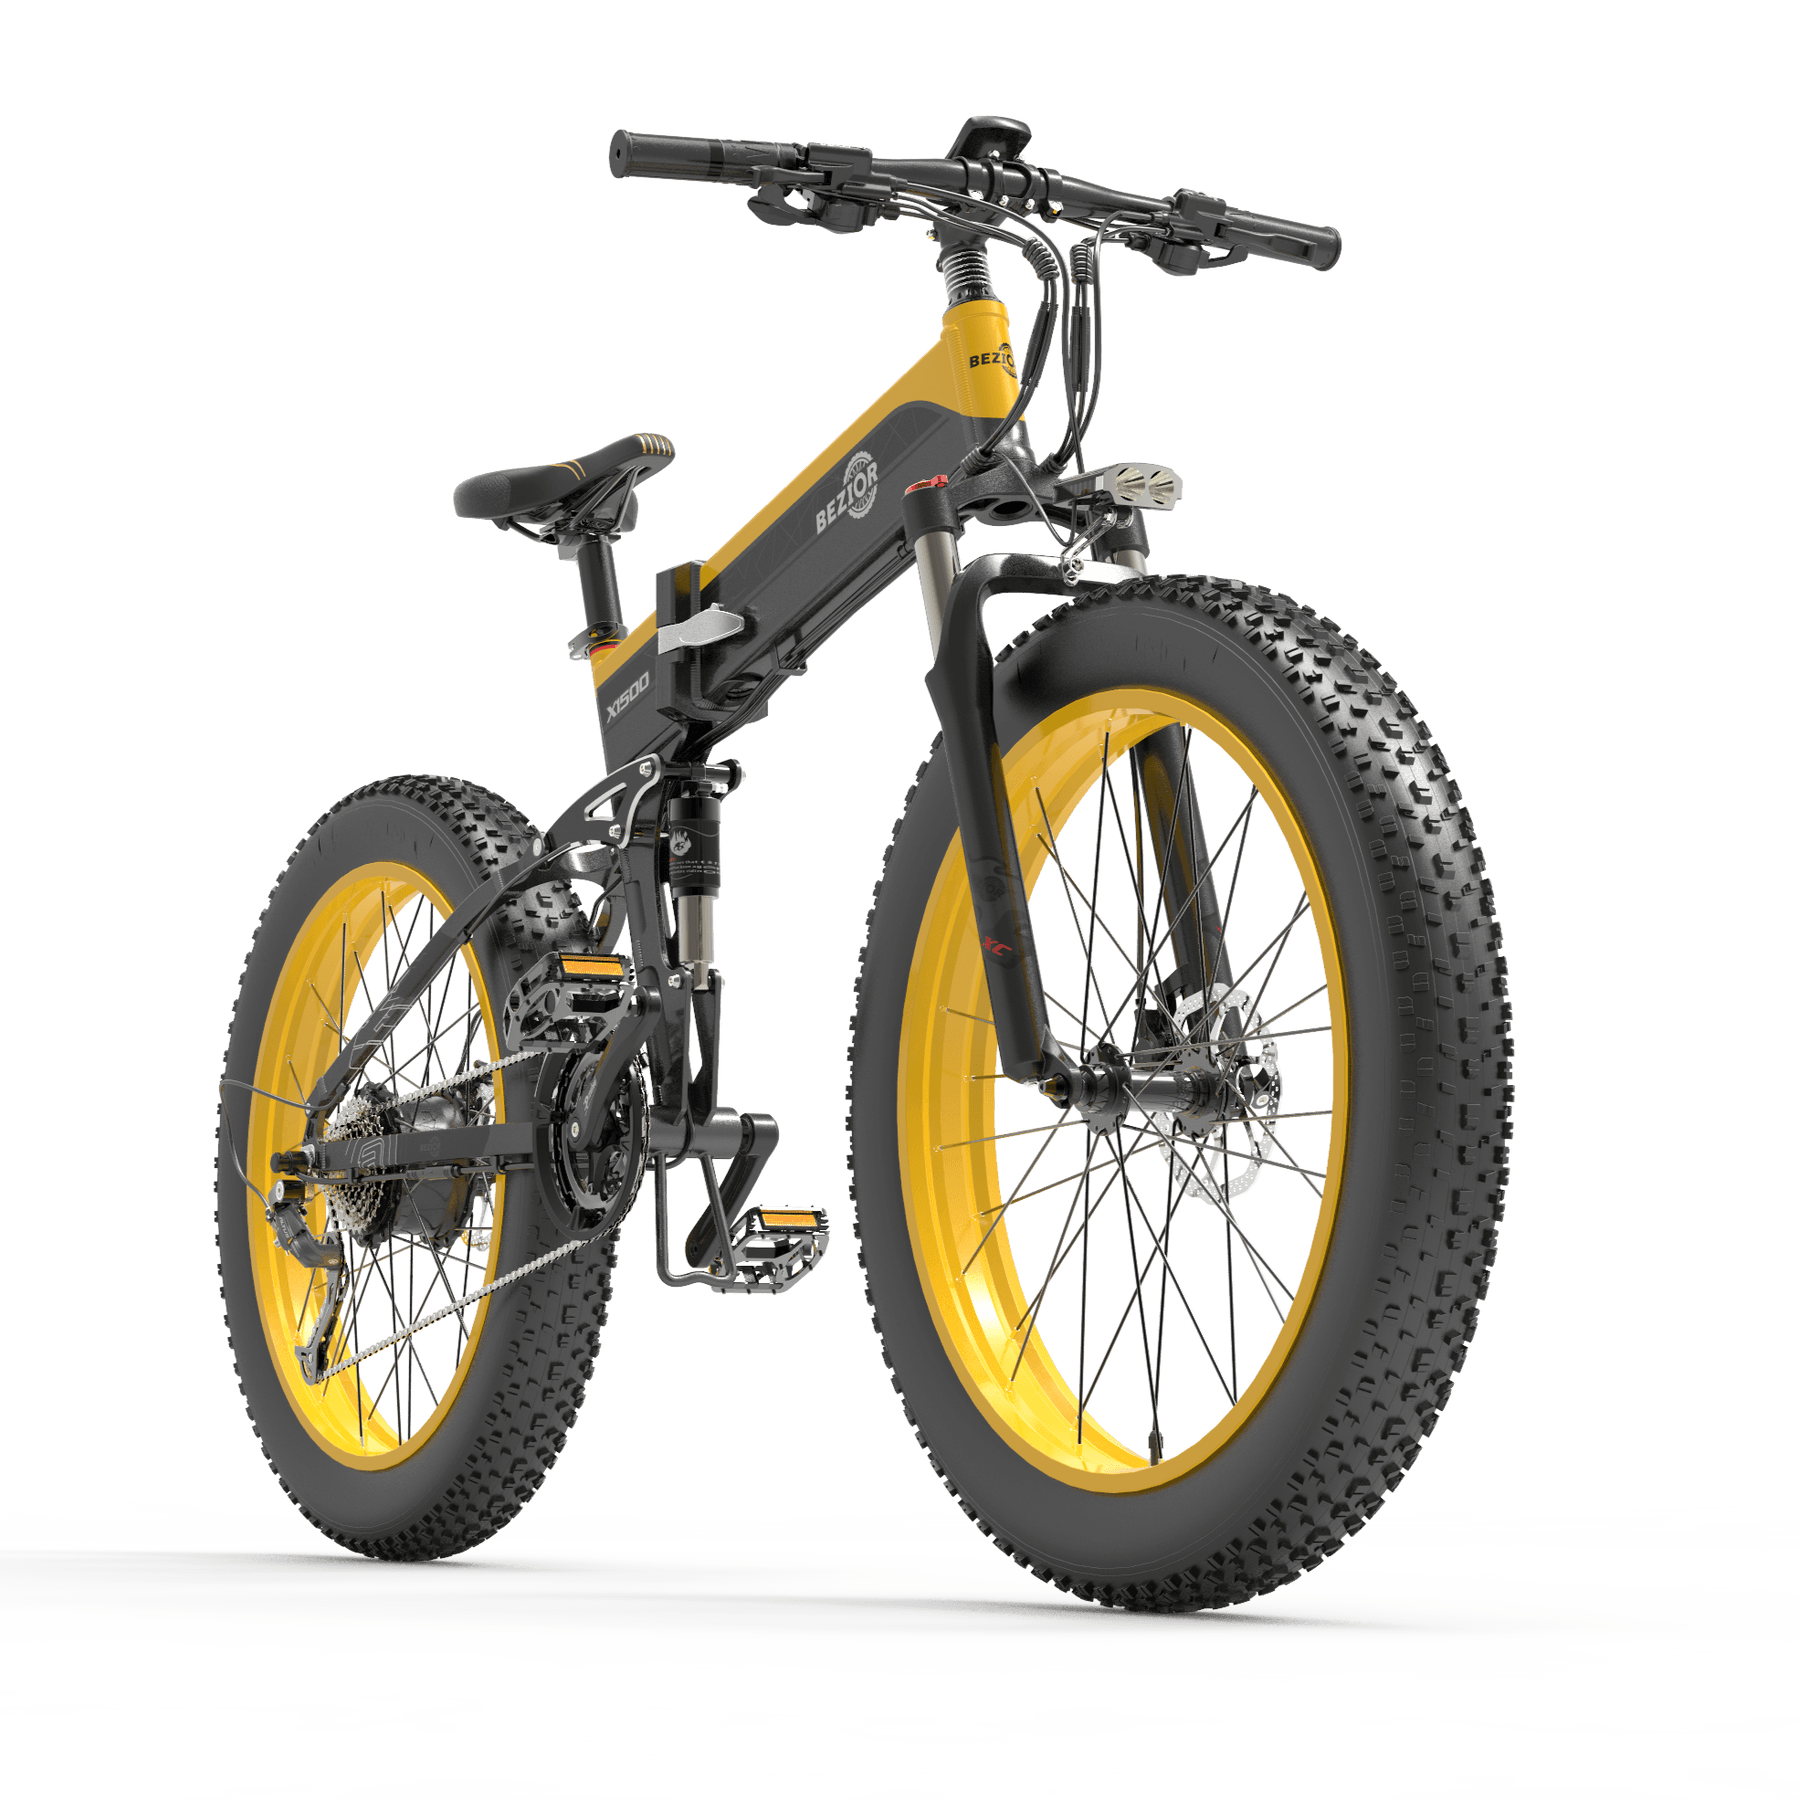 Bezior X1500 Folding Electric Mountain Bike_Preorder - Pogo Cycles available in cycle to work